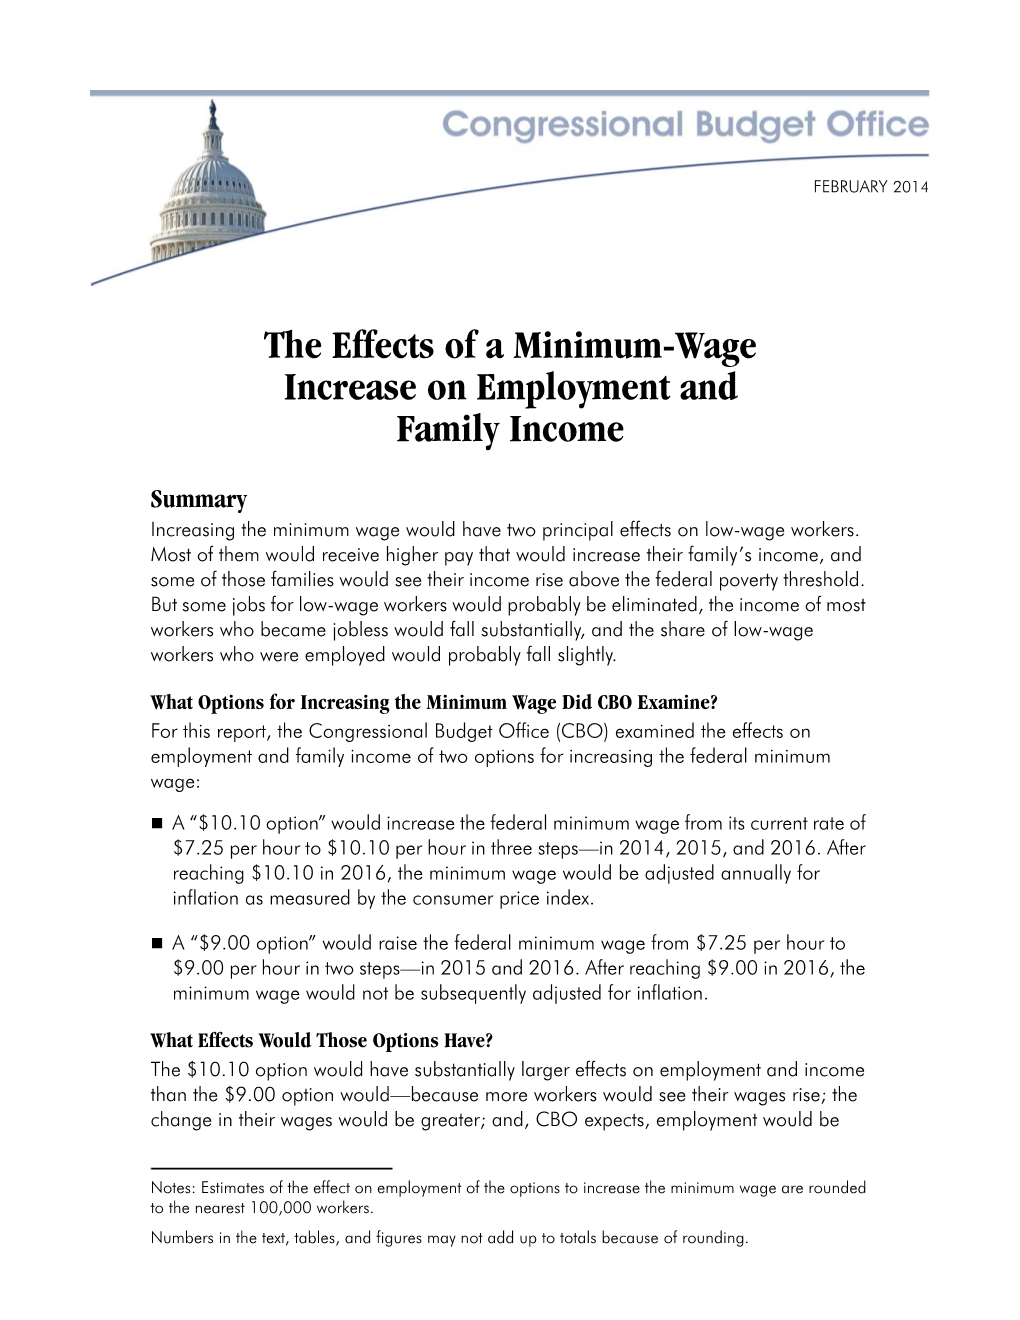 The Effects of a Minimum-Wage Increase on Employment and Family Income